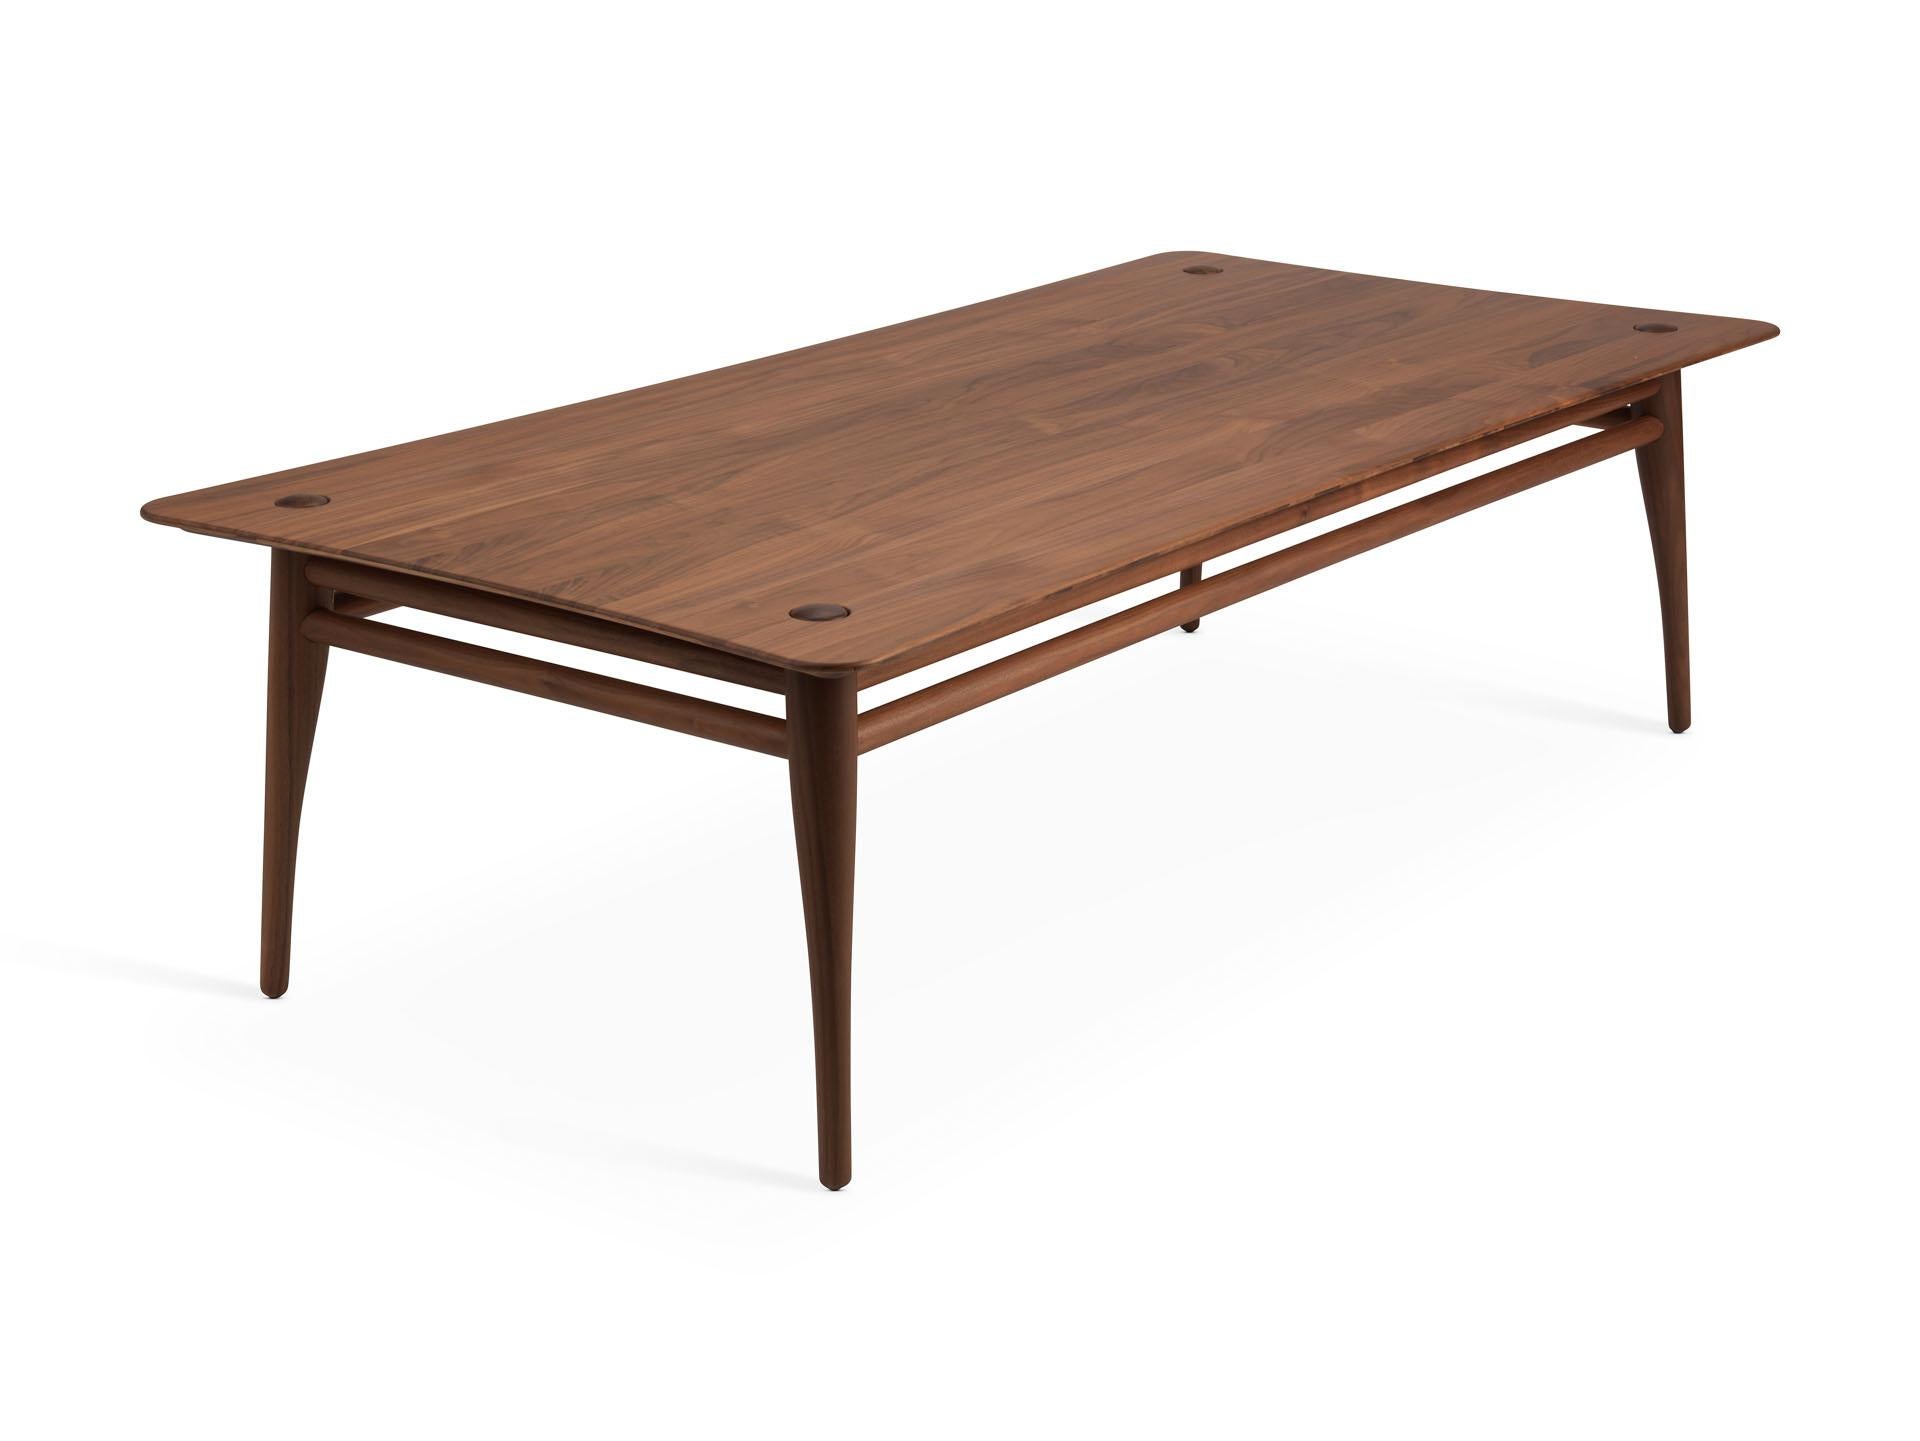 Chilgrove is a series of coffee tables crafted from a solid wooden frame and top which are gently curved. The wooden frame underneath the surface has four organic shaped legs which protrude elegantly through the surface of the table. The Chilgrove